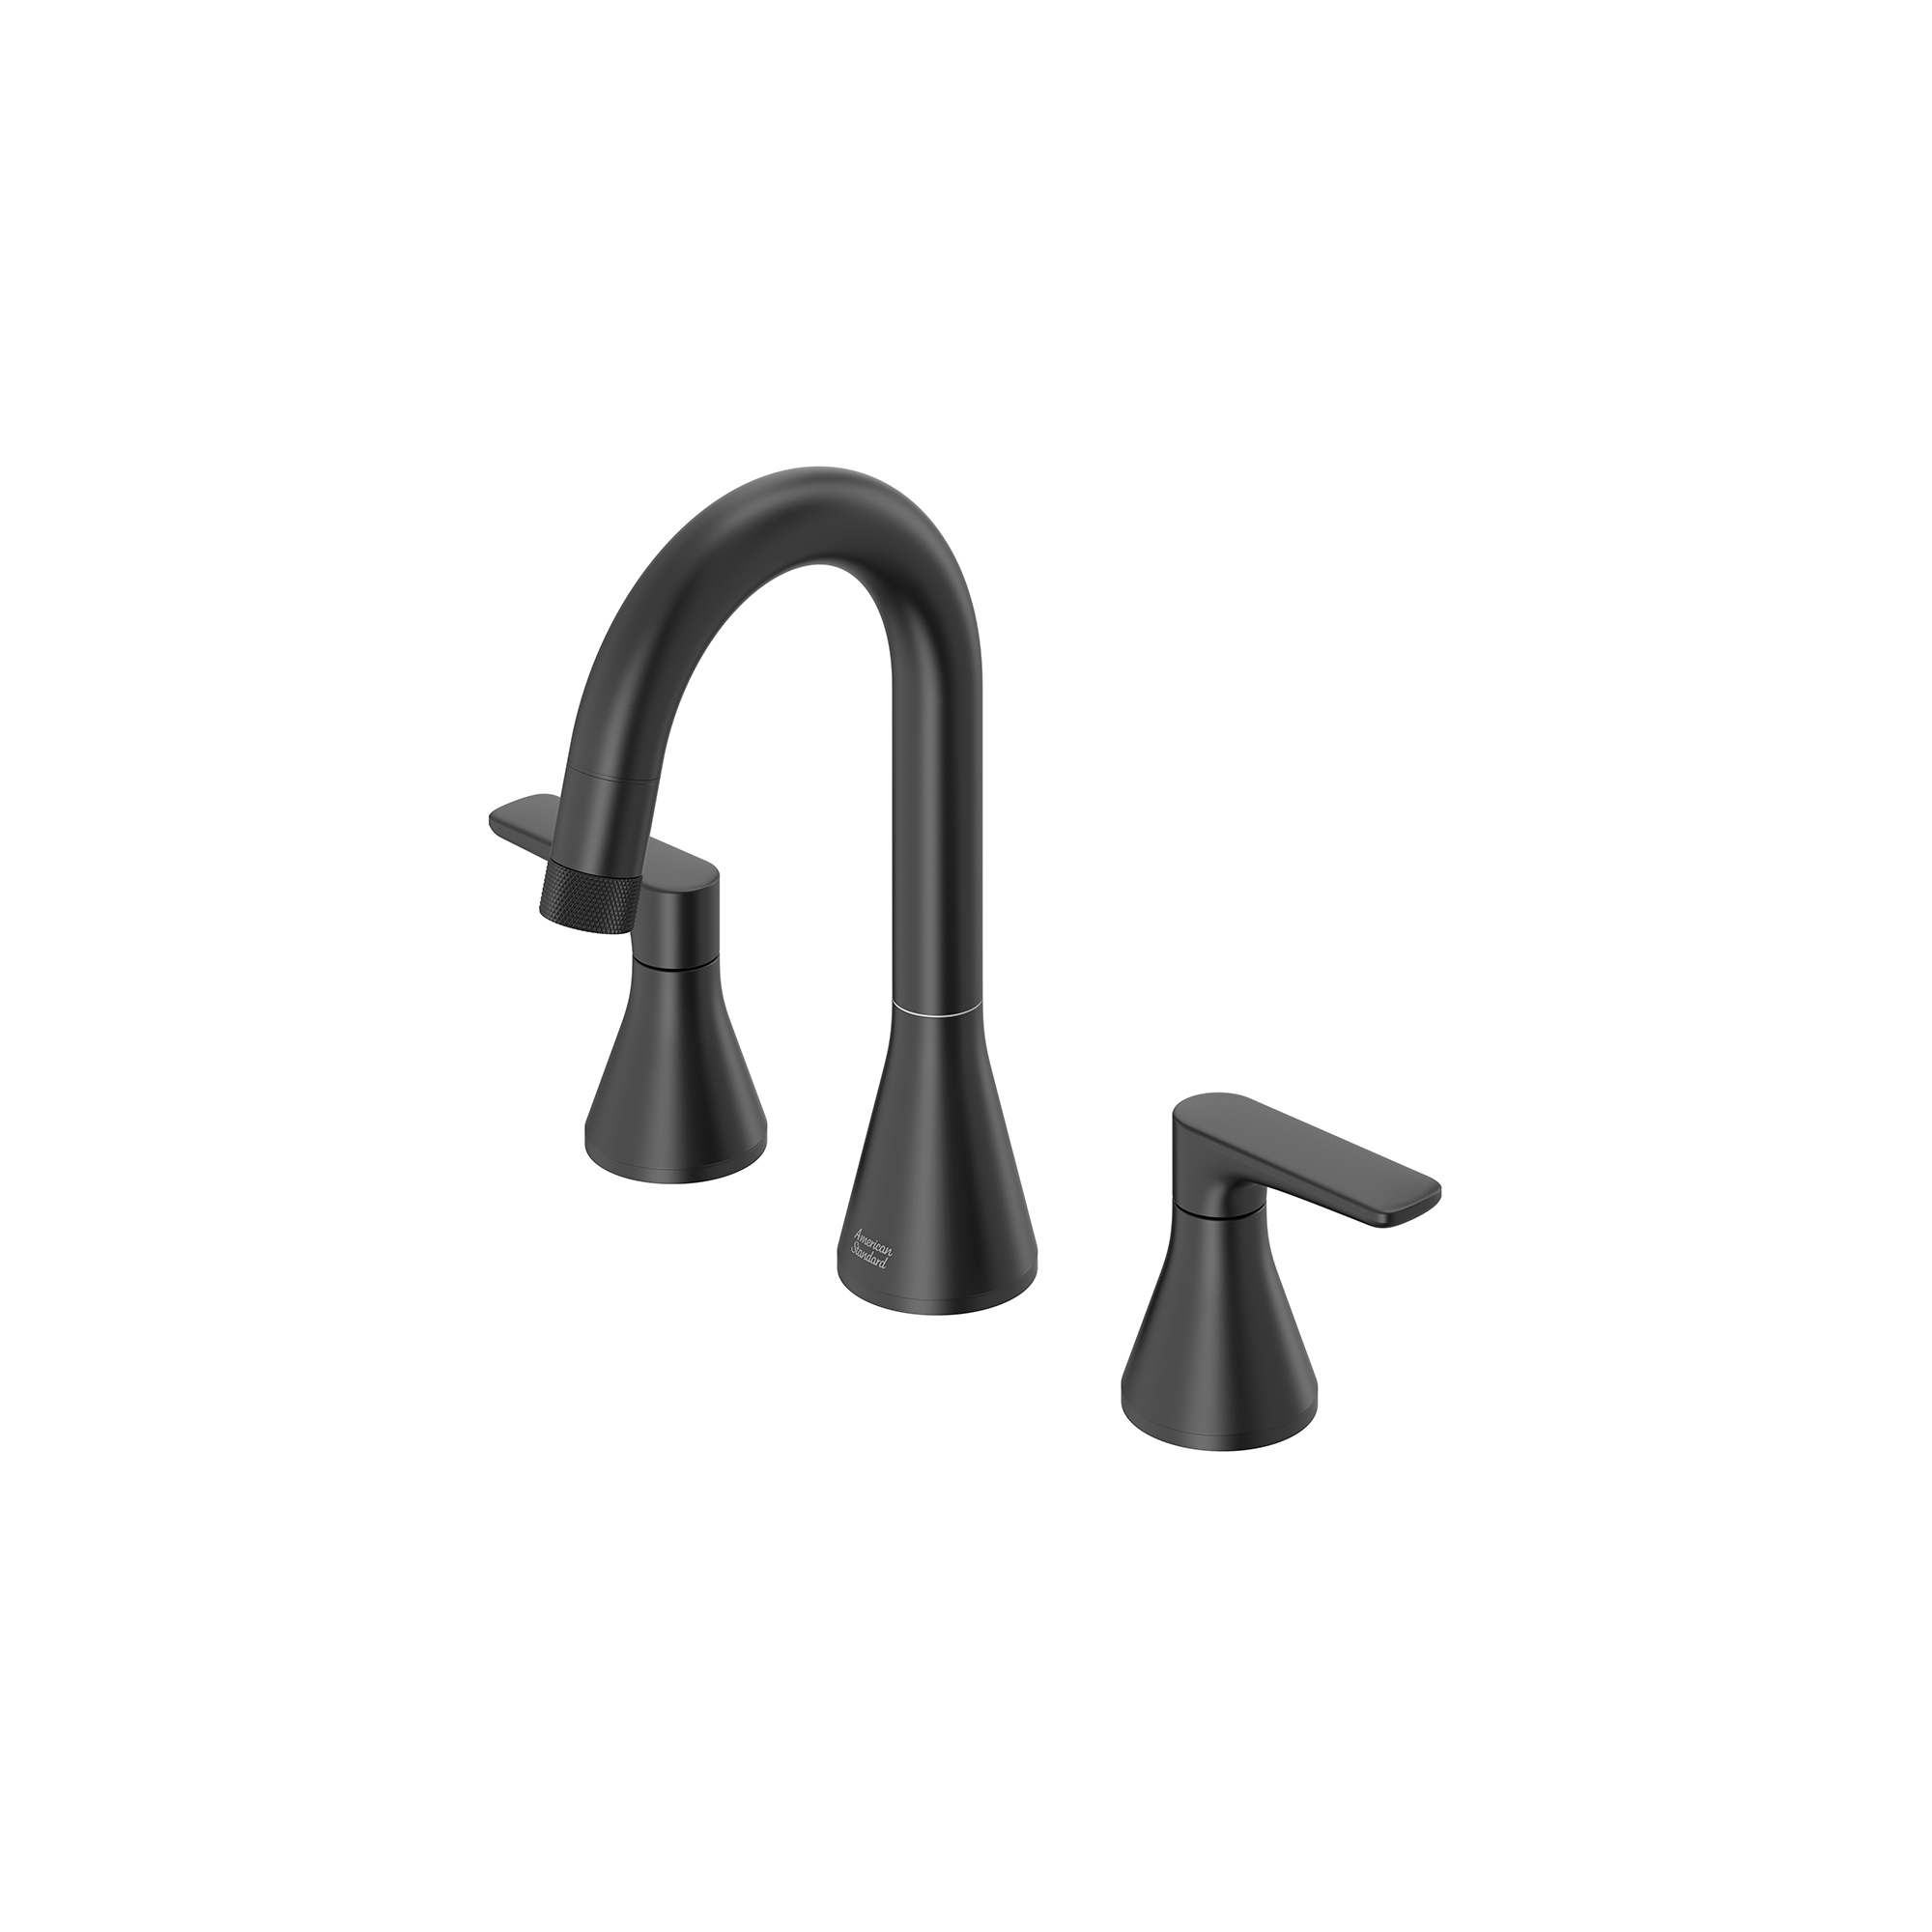 Aspirations™ 8-Inch Widespread 2-Handle Pull-Down Bathroom Faucet 1.2gpm/4.5 L/min With Lever Handles